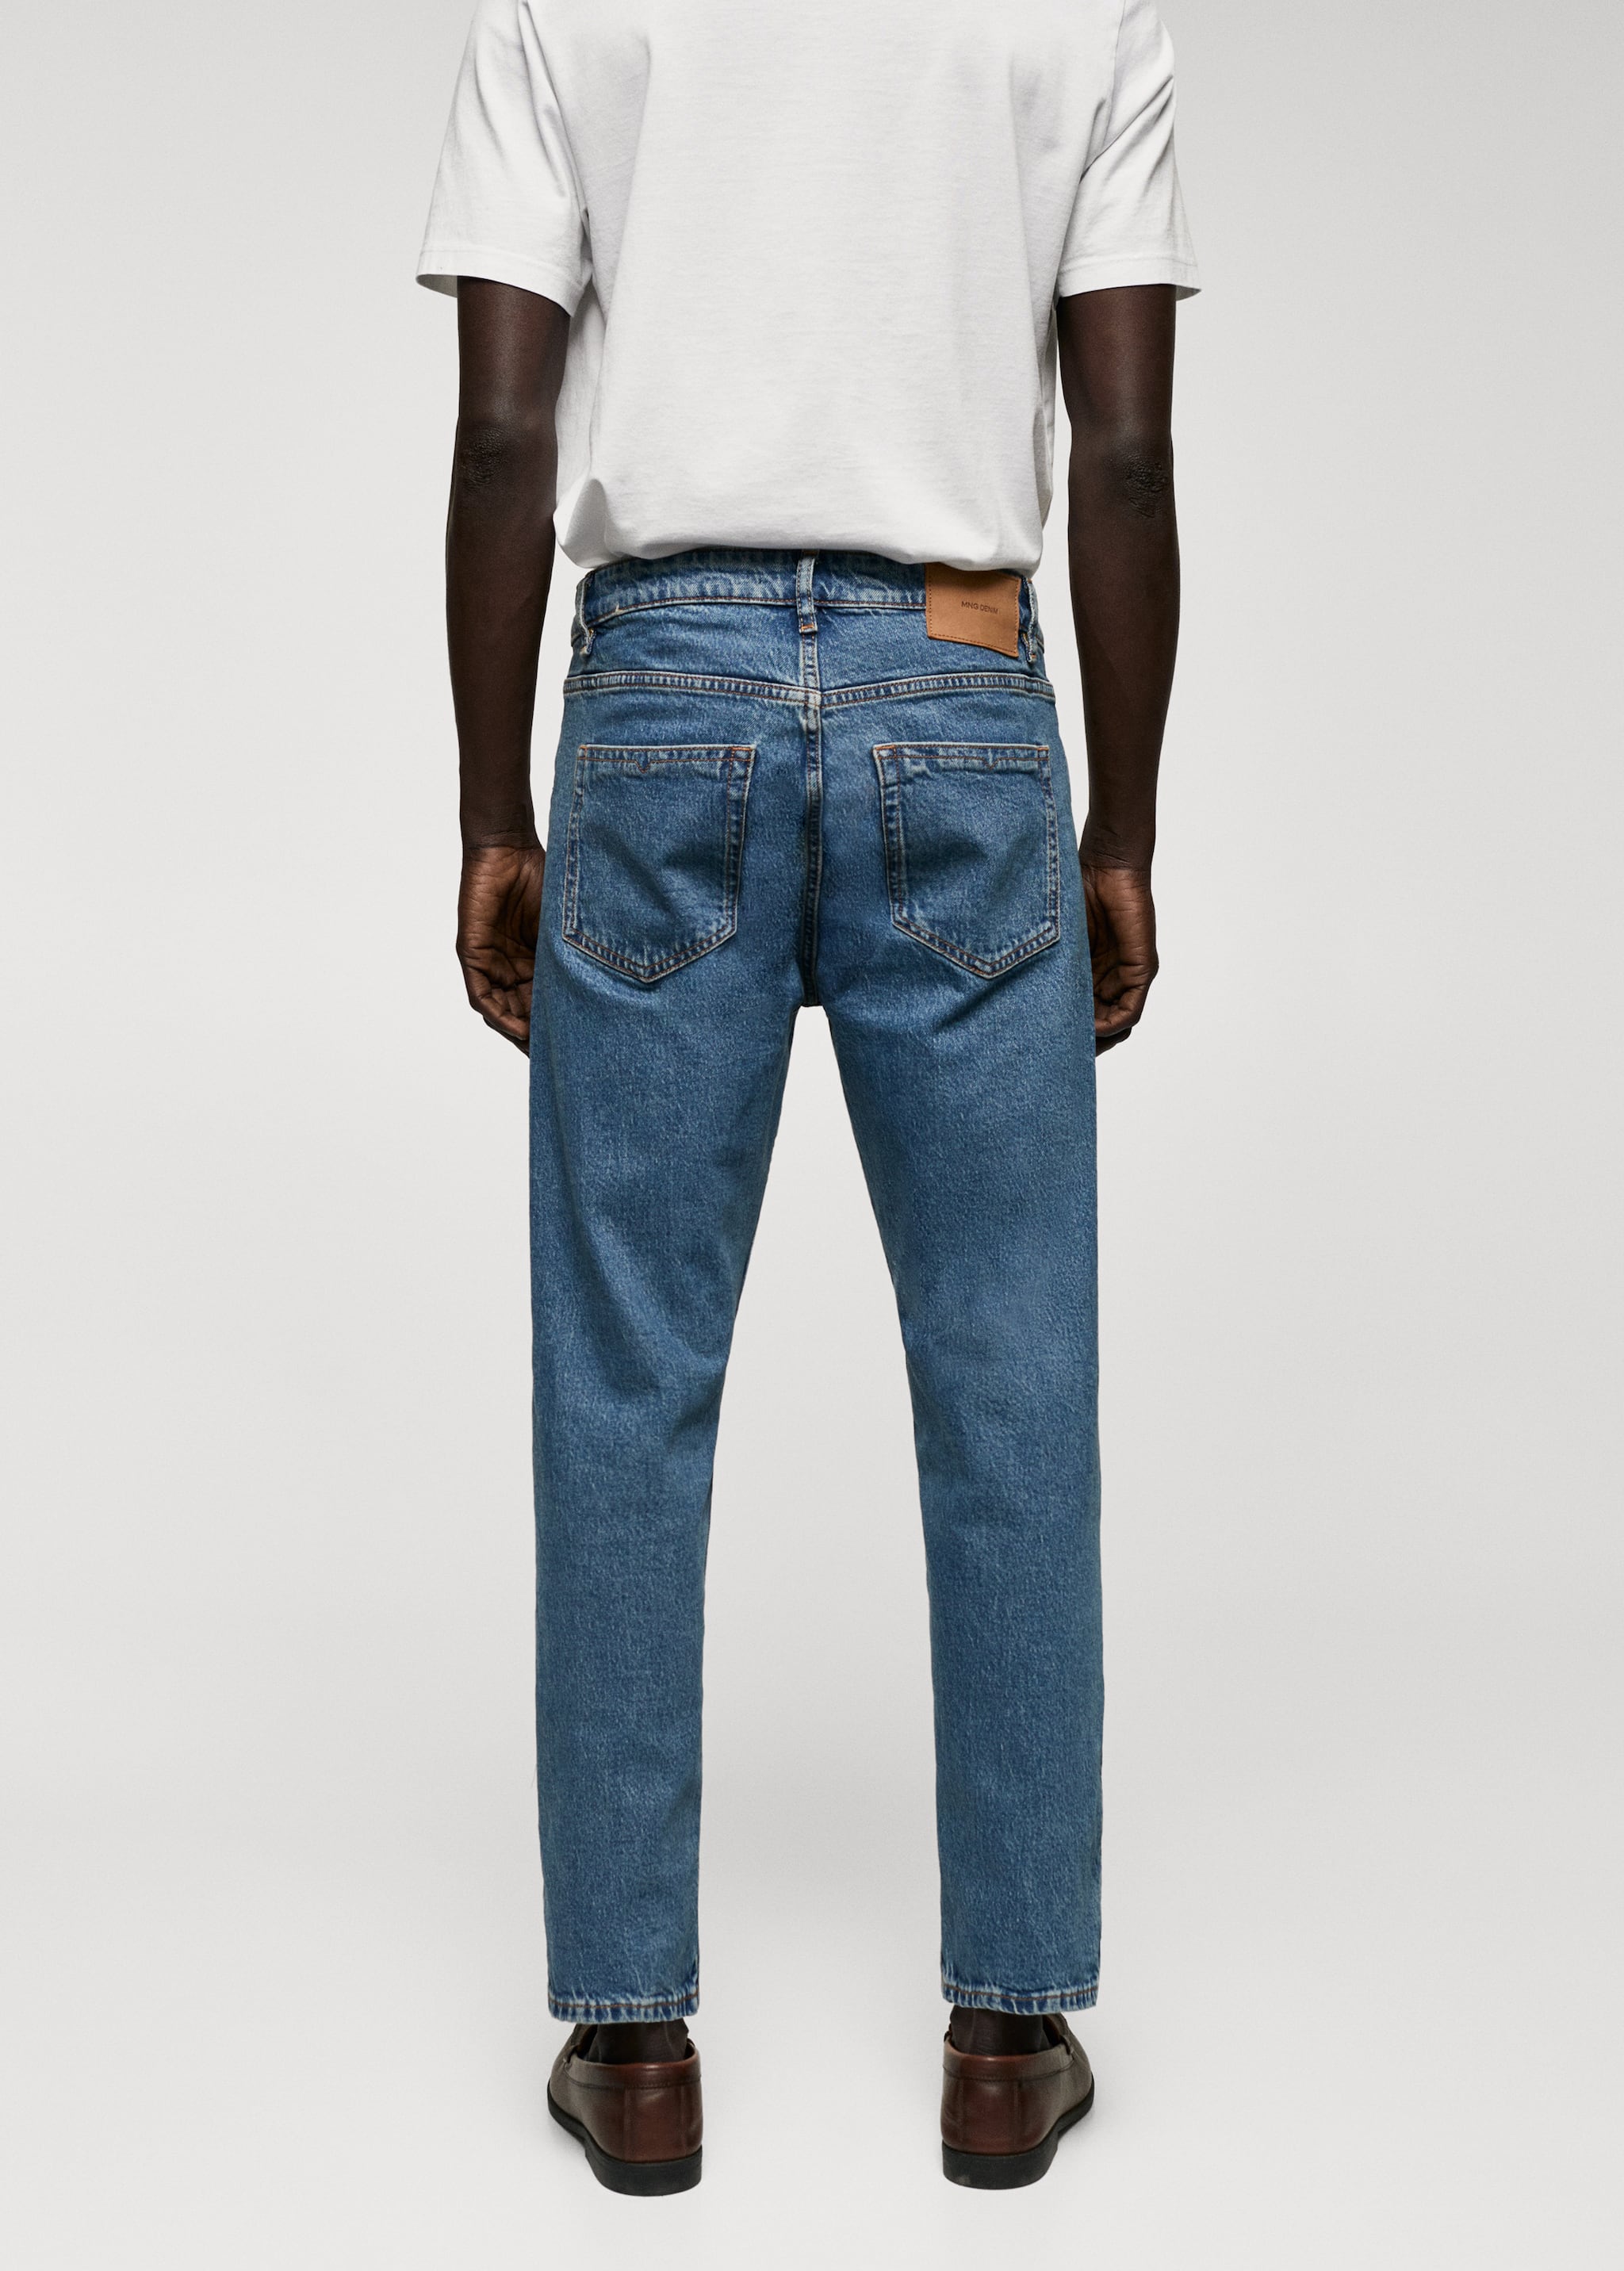 Jean Ben tapered cropped - Verso de l’article